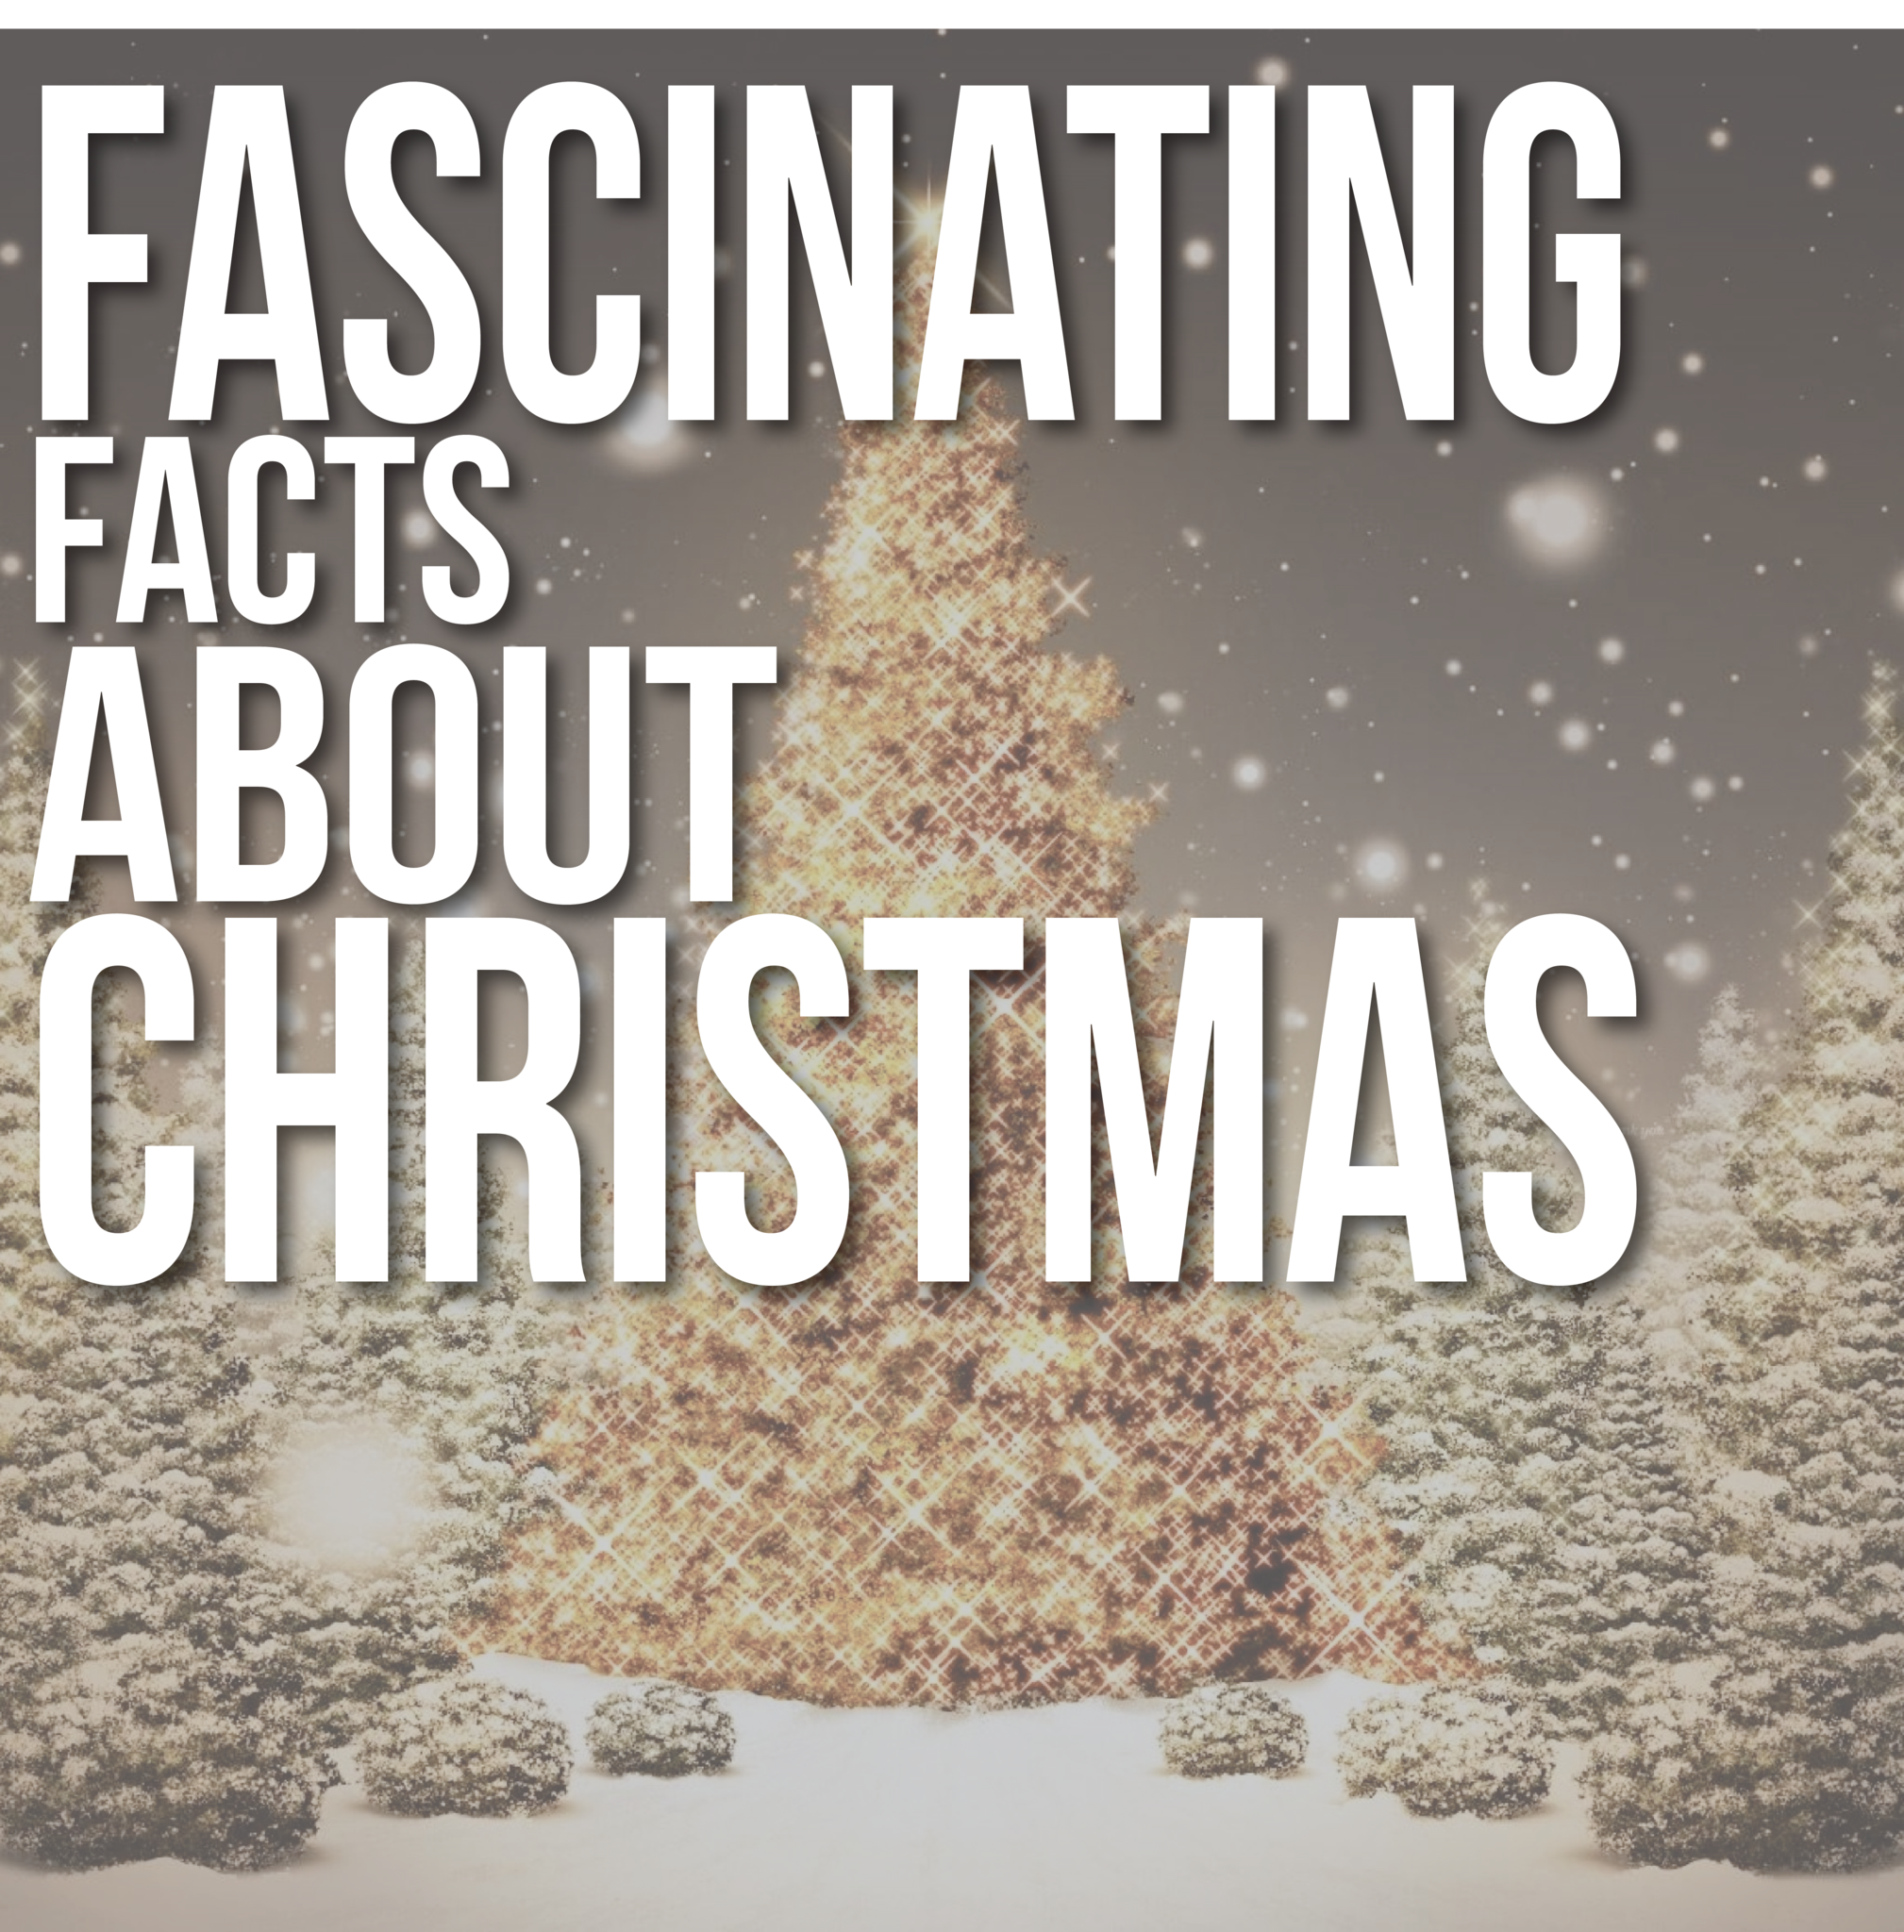 10 Fascinating Facts about Christmas